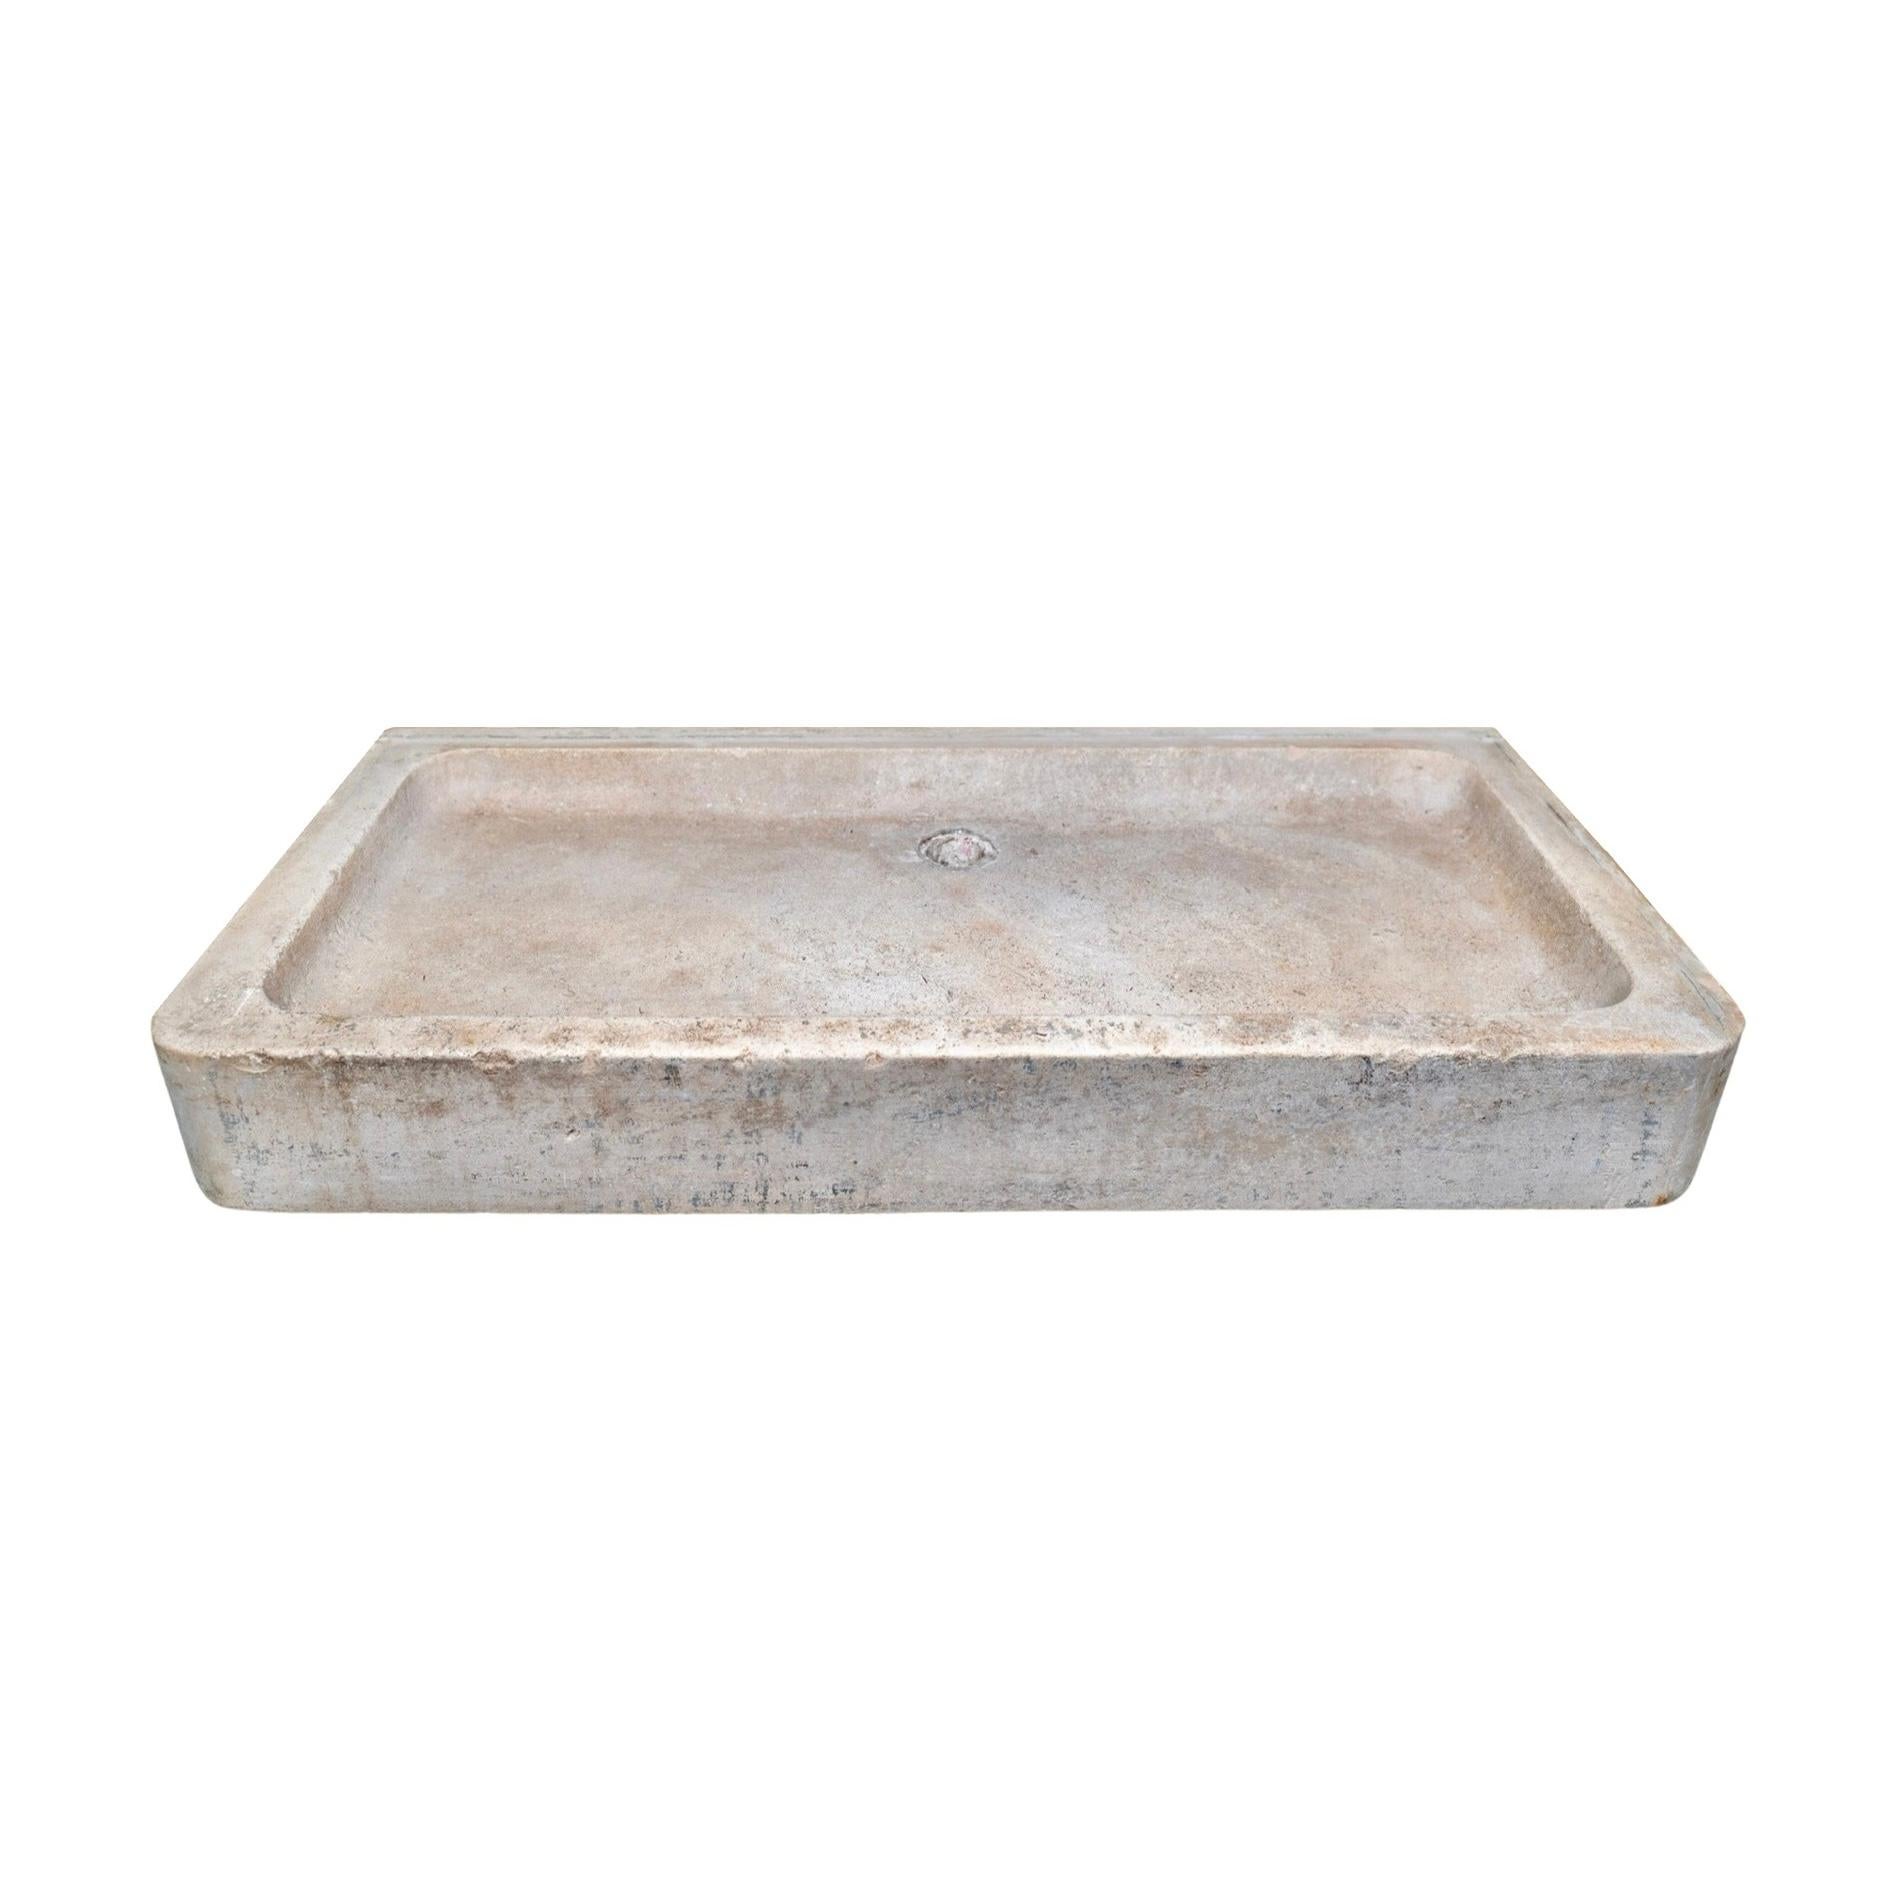 Expertly crafted from luxurious burgundy limestone, this 18th-century French sink boasts a low-line style and spacious rectangular shape. The pre-drilled hole at the center top allows for efficient drainage, making it a practical as well as stunning